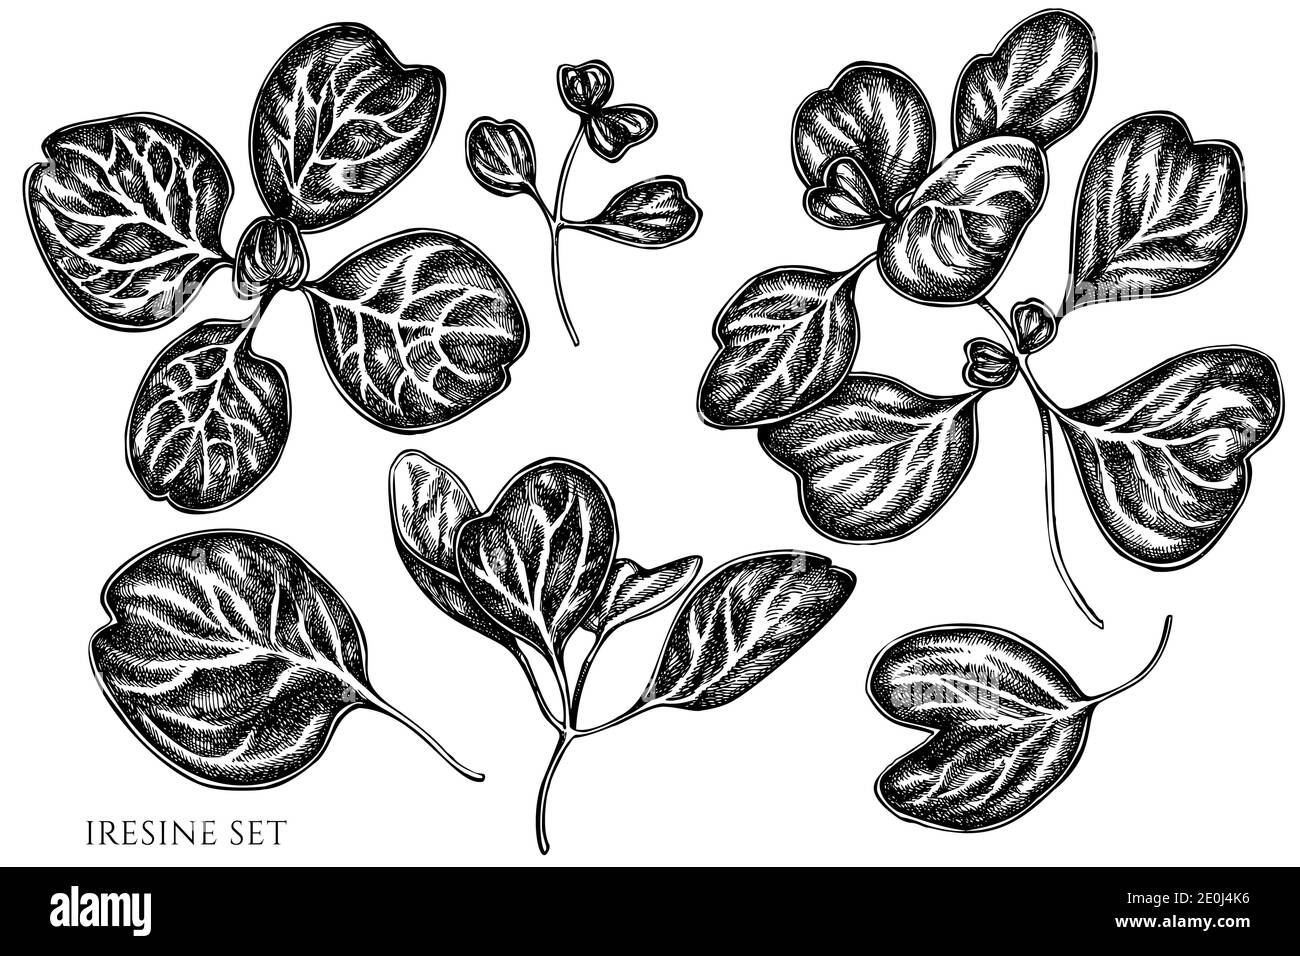 Vector set of hand drawn black and white iresine Stock Vector